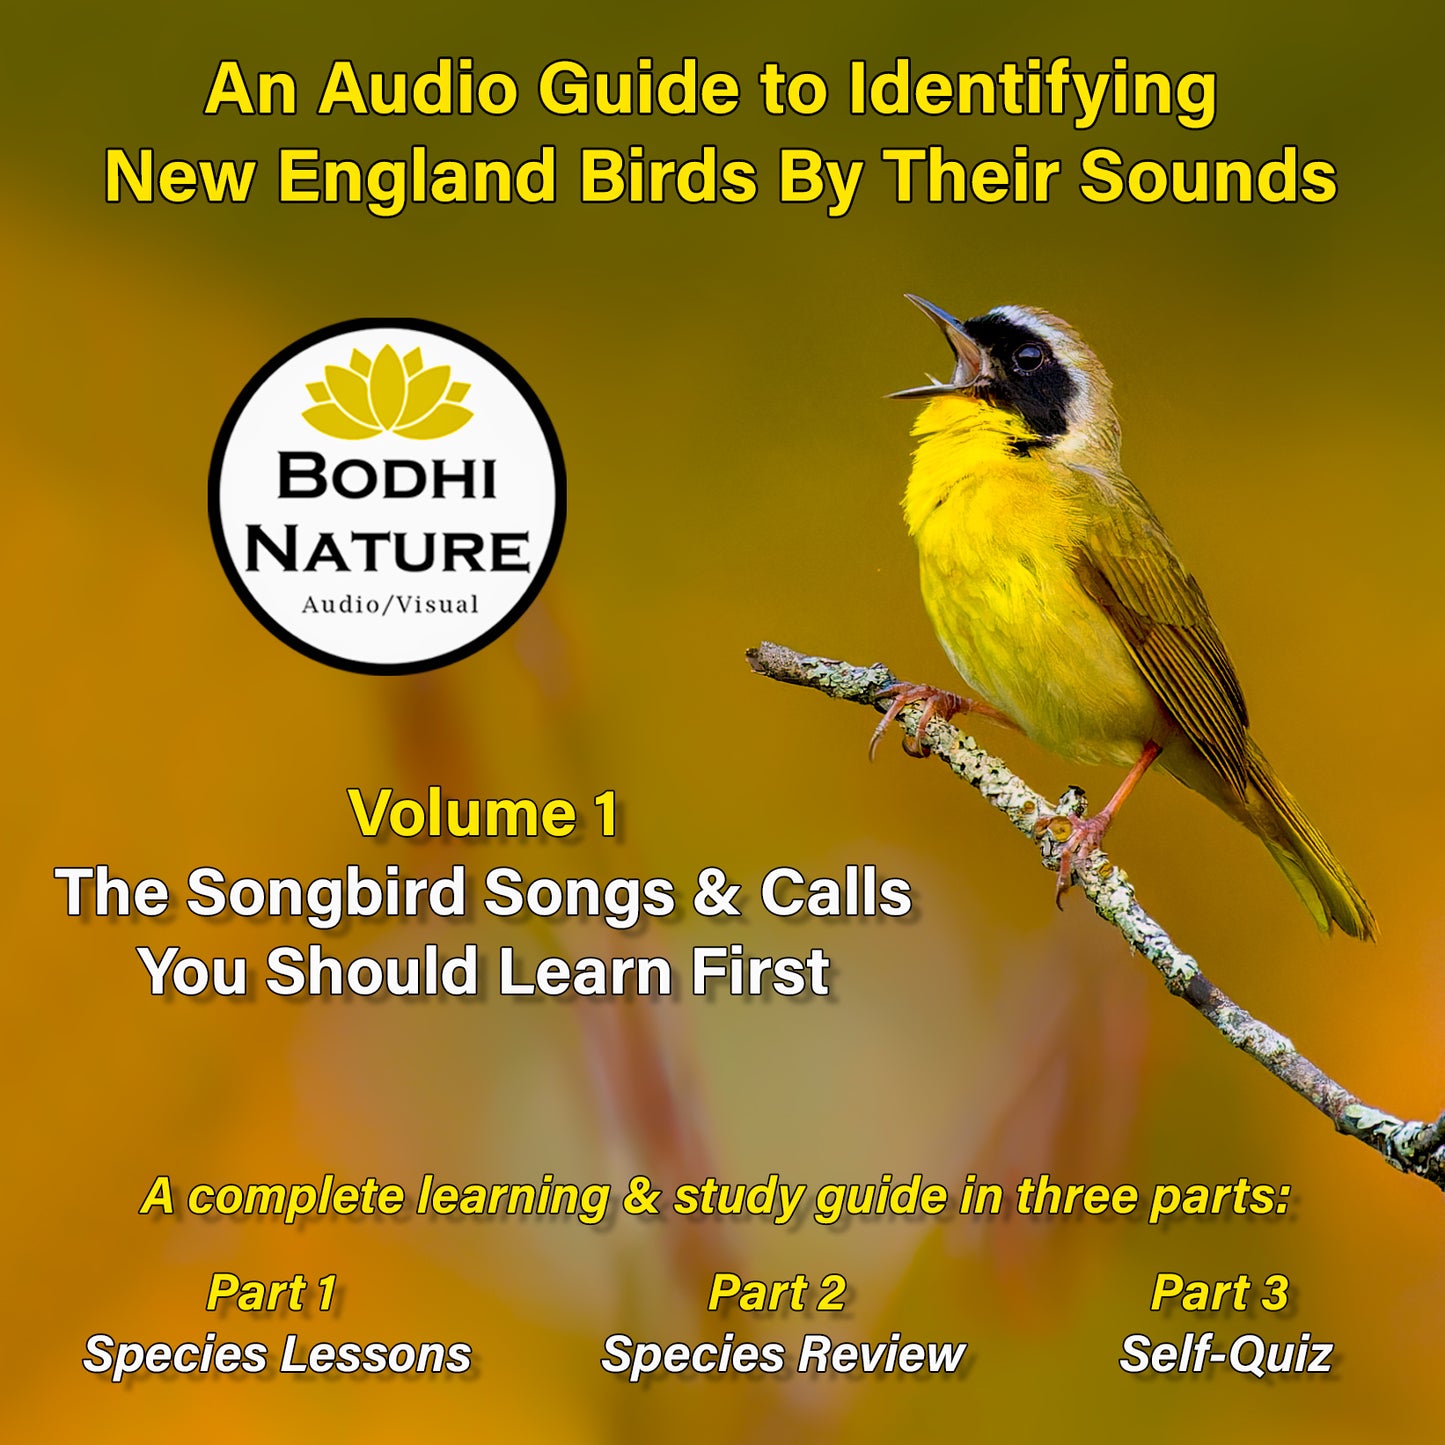 An Audio Guide to Identifying New England Birds By Their Sounds - Volume 1: The Songbird Songs & Calls You Should Learn First